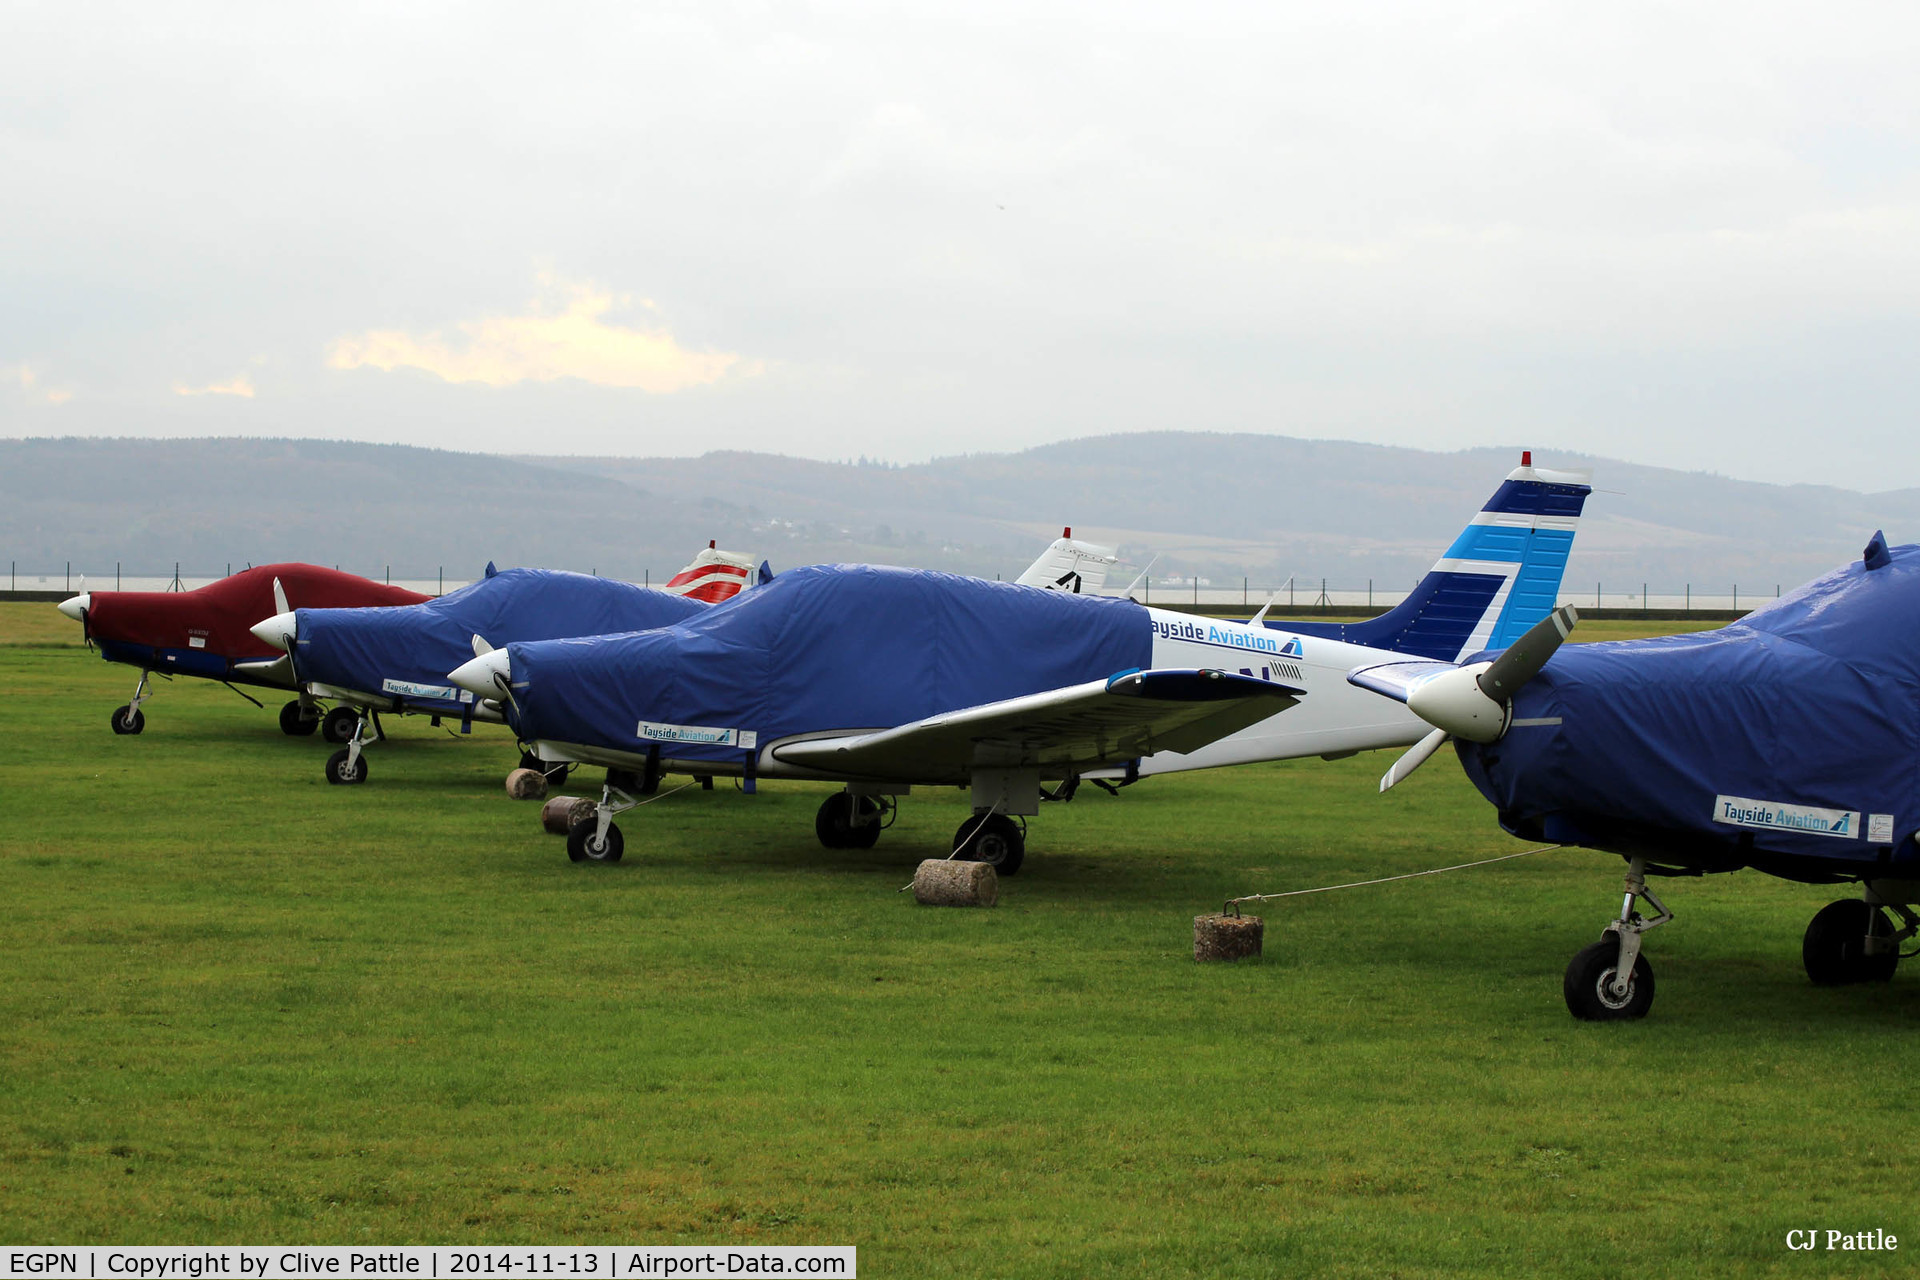 Dundee Airport, Dundee, Scotland United Kingdom (EGPN) - A line-up of PA-28's of Tayside Aviation at Dundee Riverside, wrapped in their protection for winter.